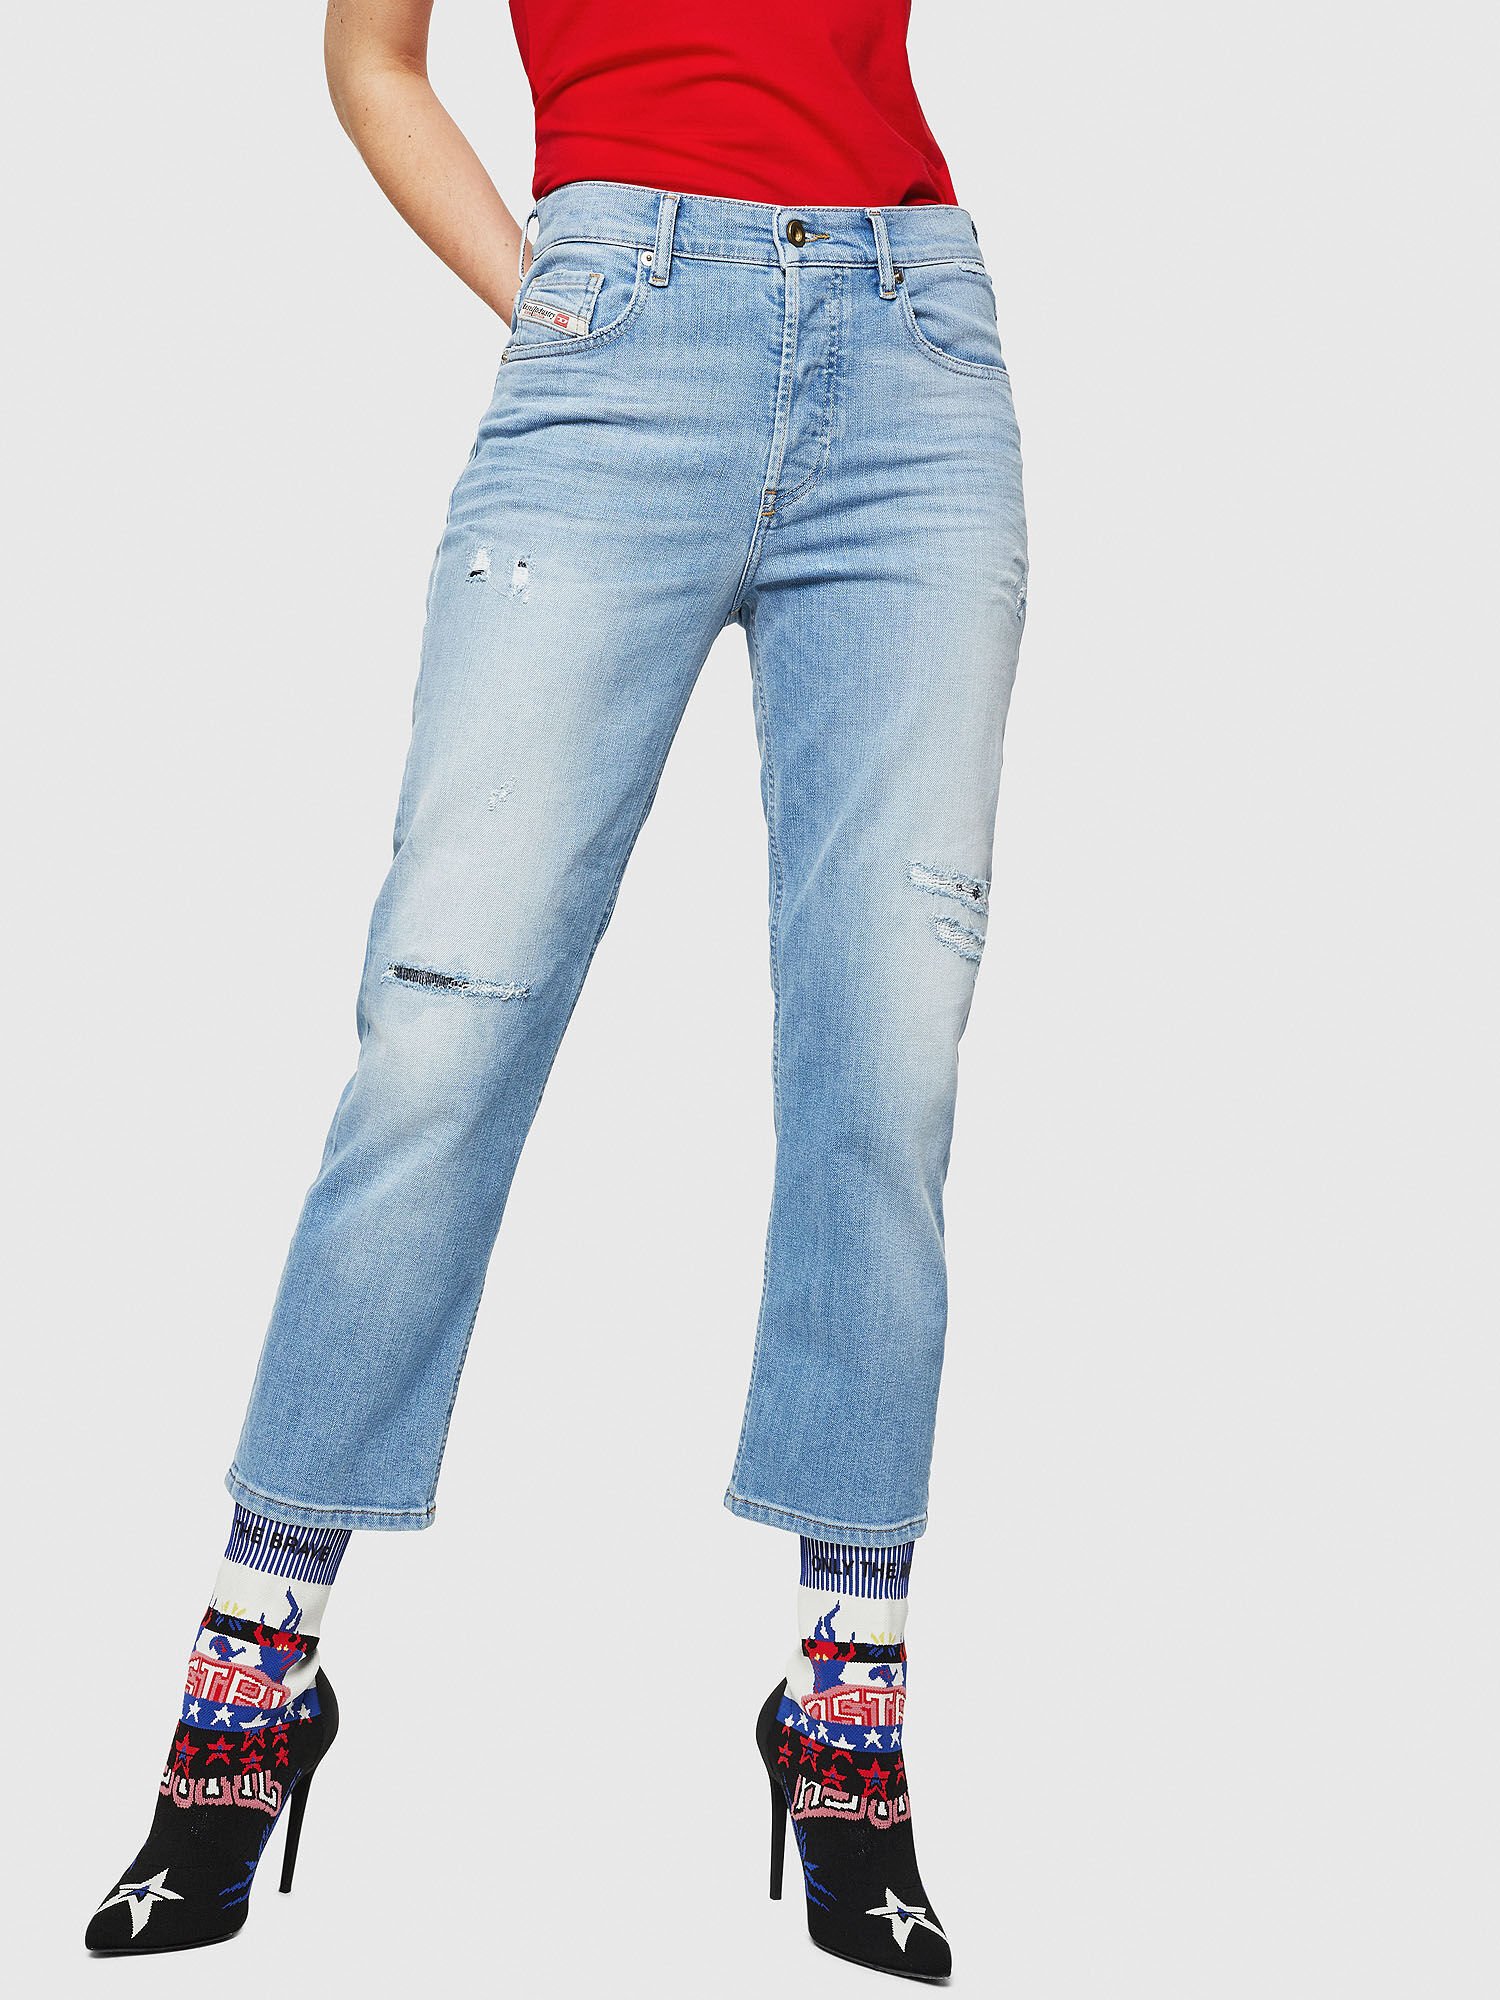 AVB Hot Girl Ripped Jeans – Ariel's Vintage Boutique